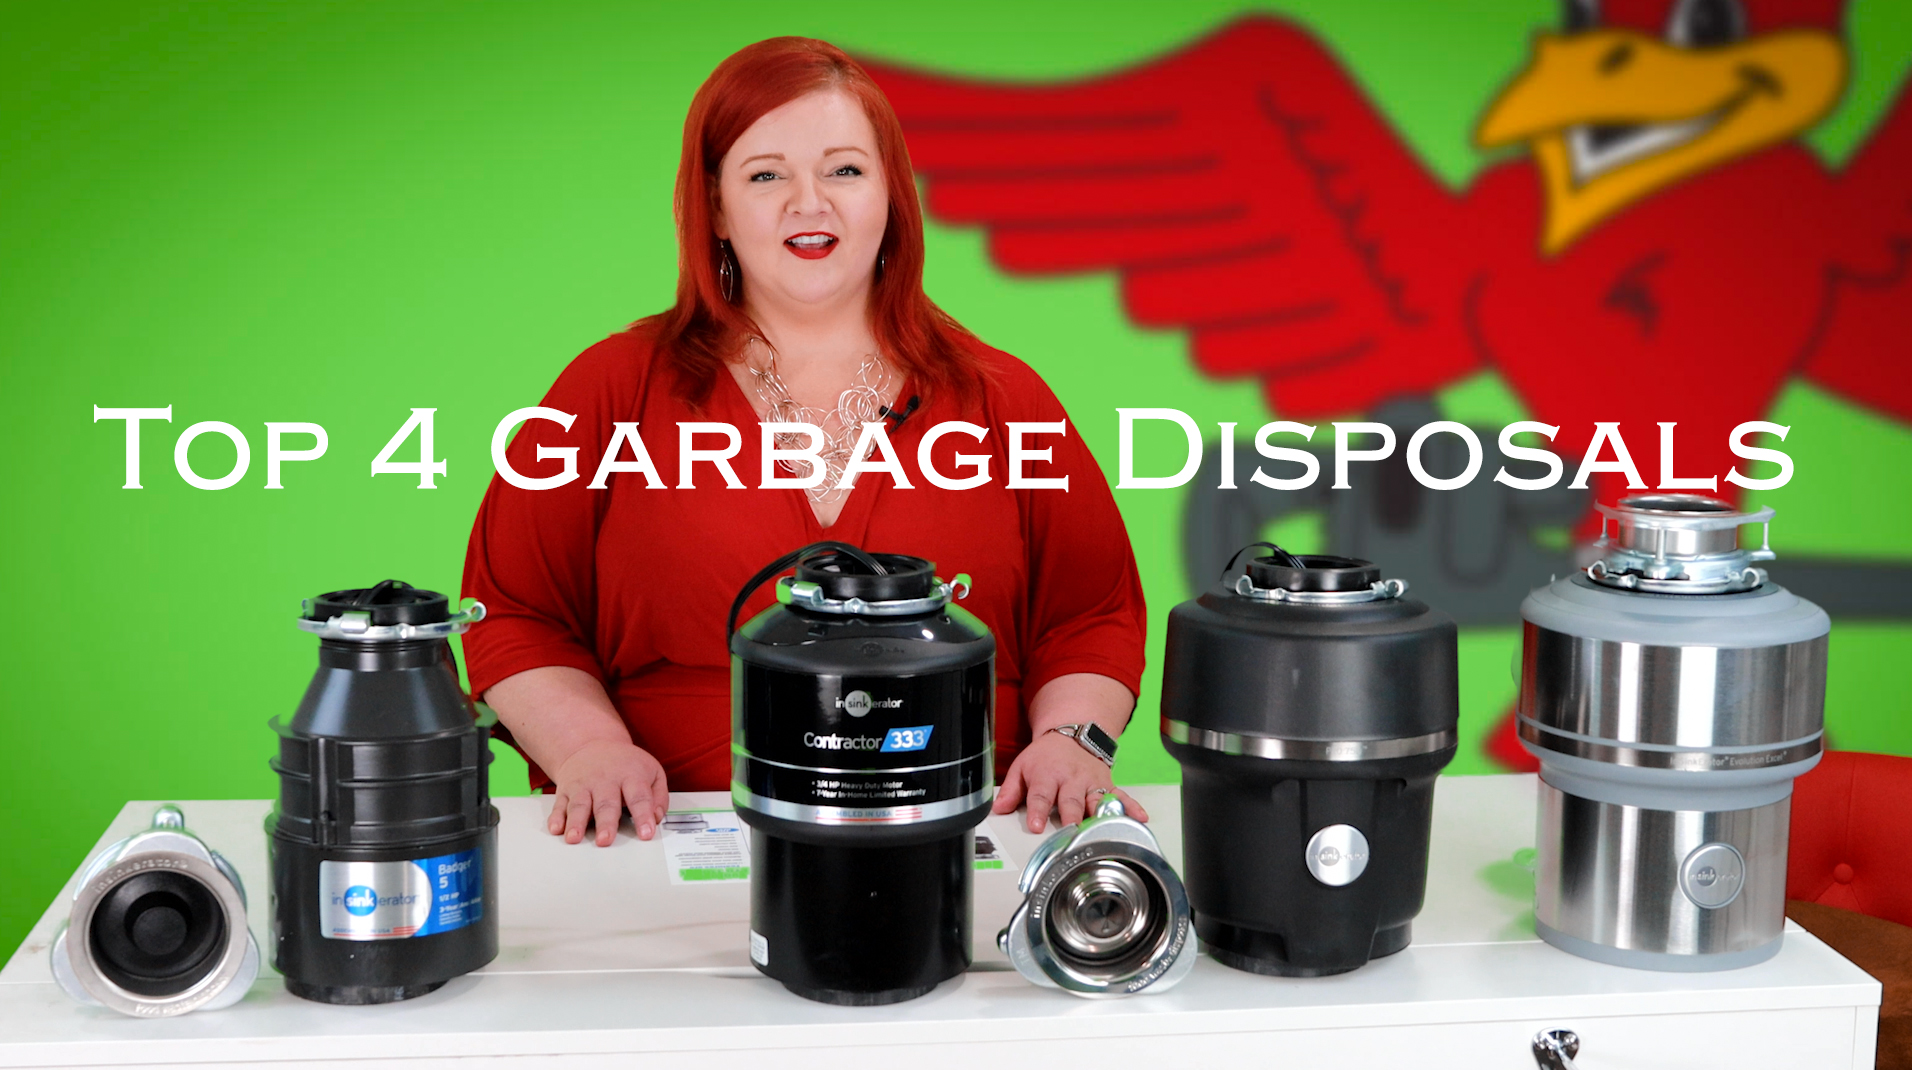 Cover image of the blog "Top 4 Garbage Disposals" which reviews the best disposal options on the market